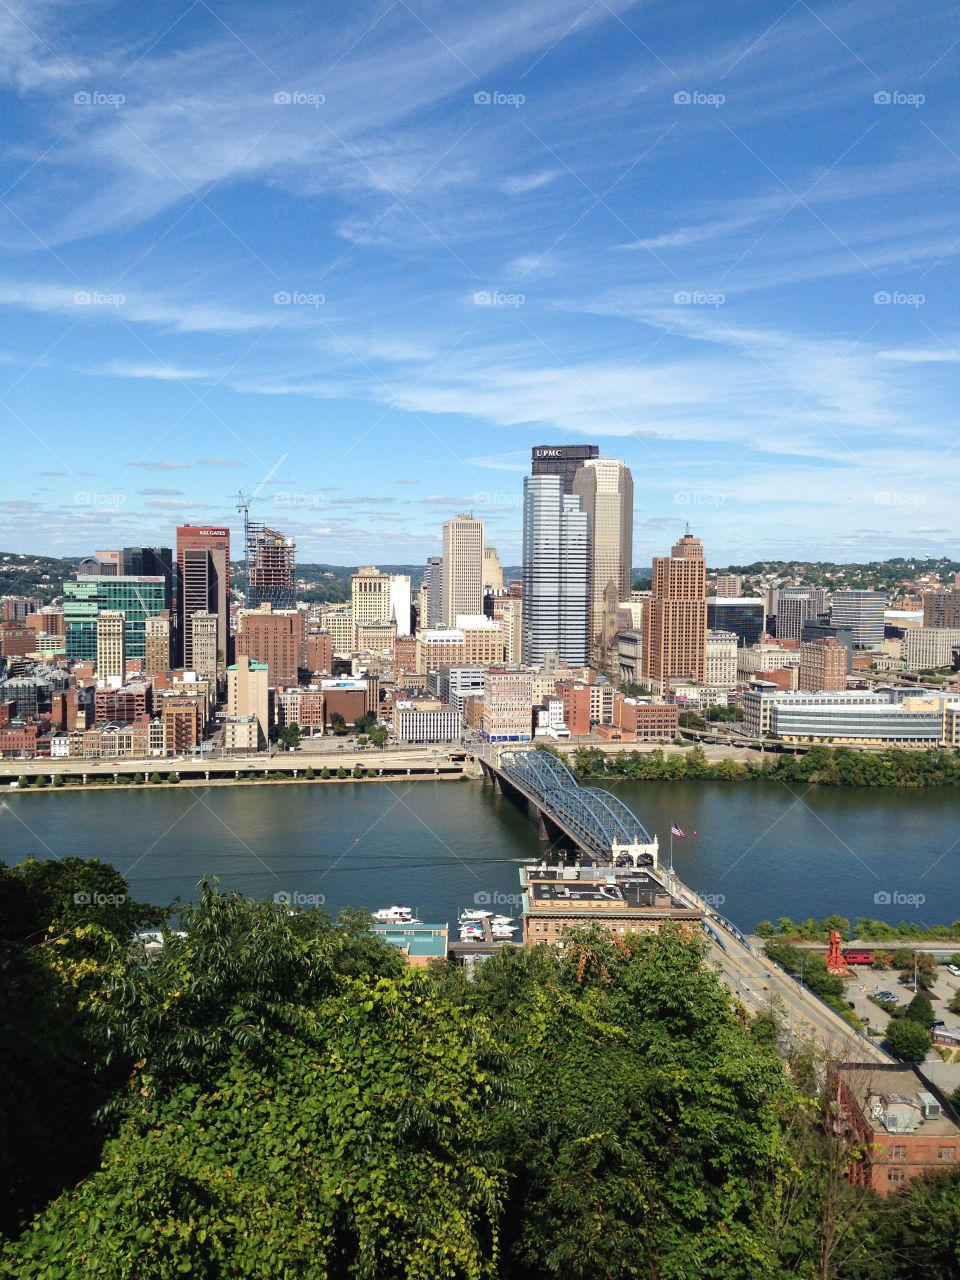 Downtown Pittsburgh